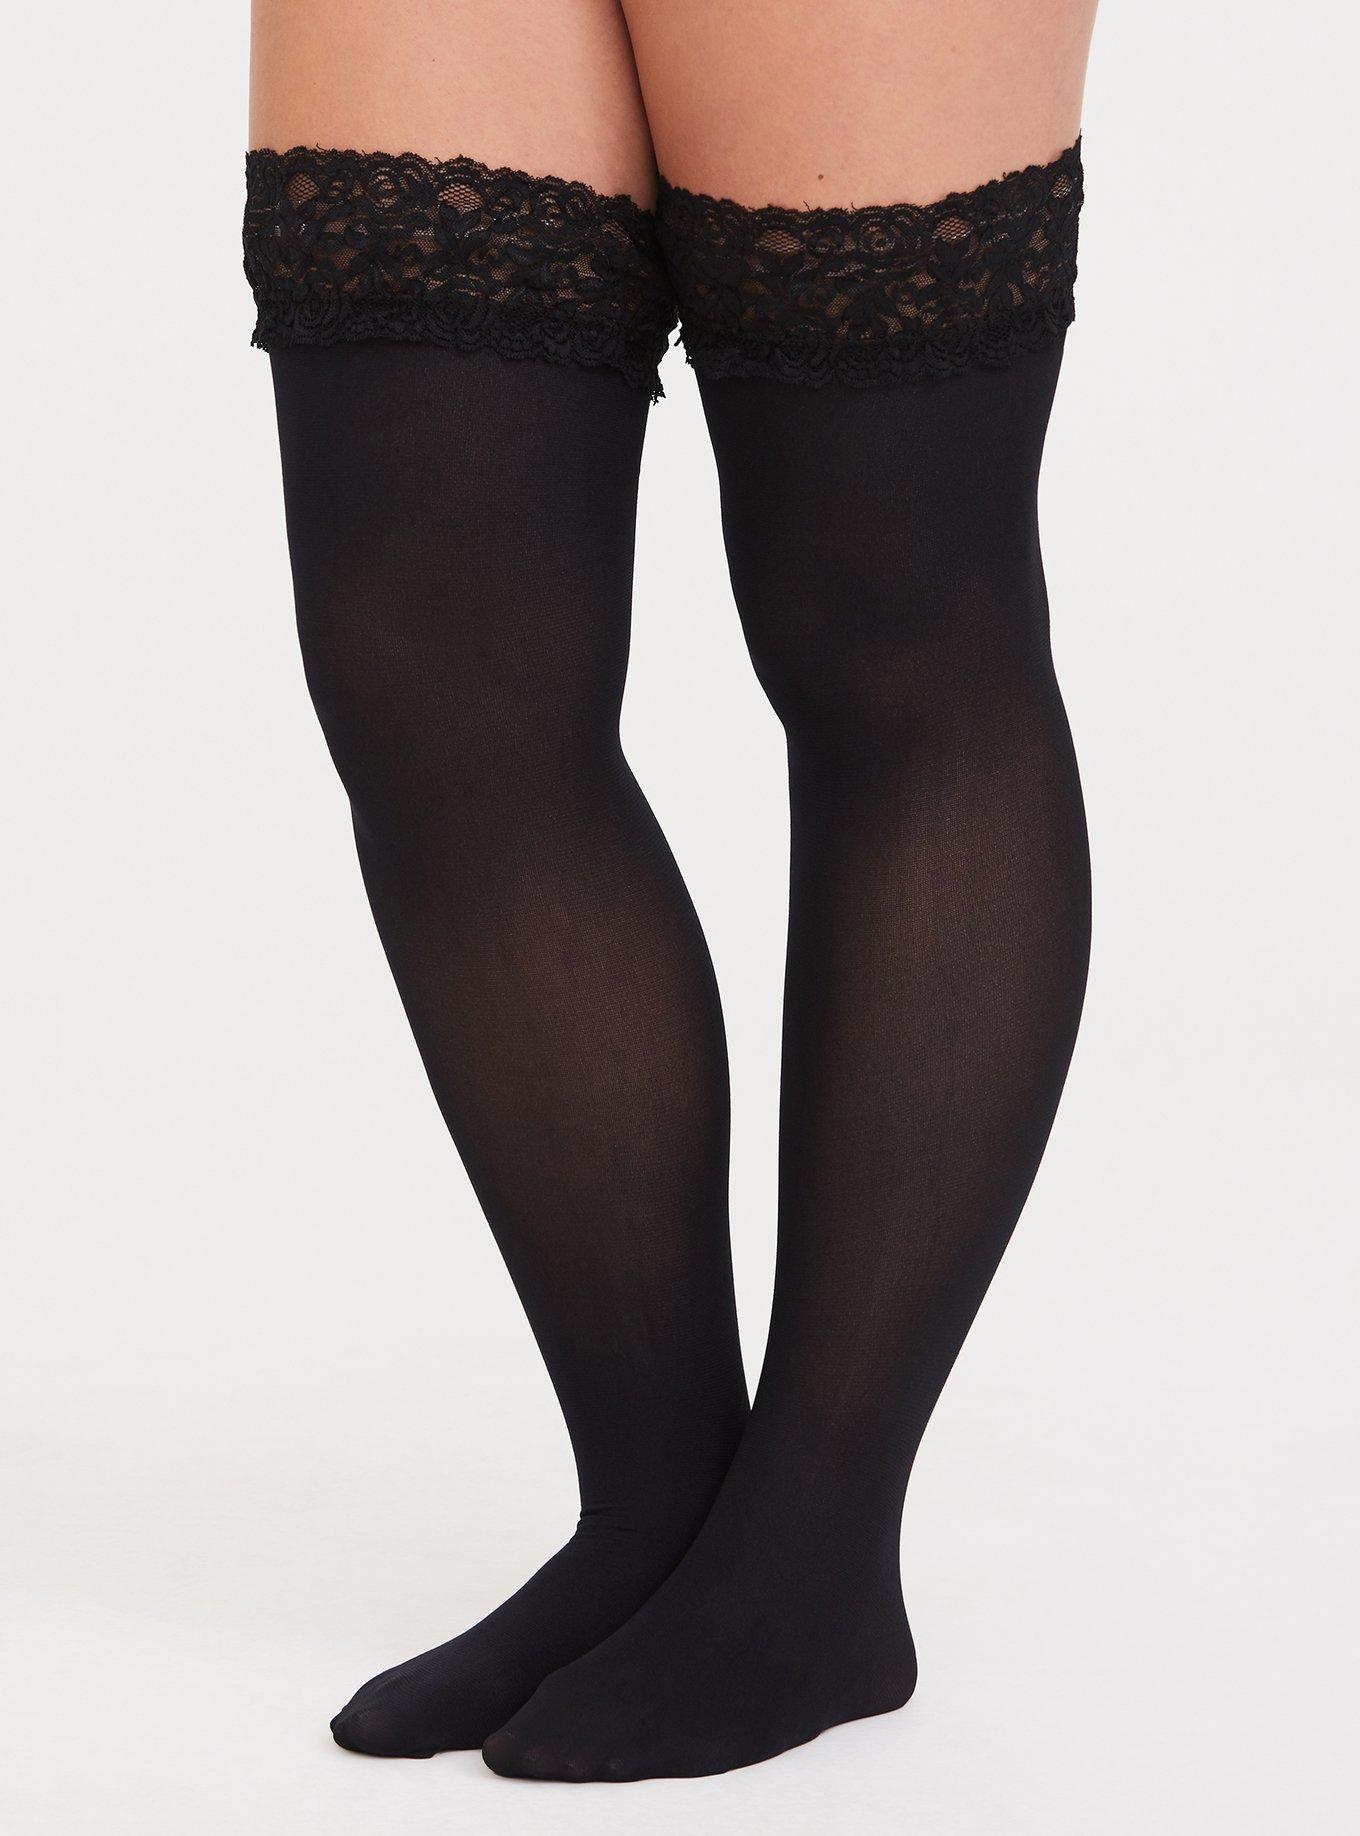 Plus Size - Black Lace Thigh High Tights - Torrid